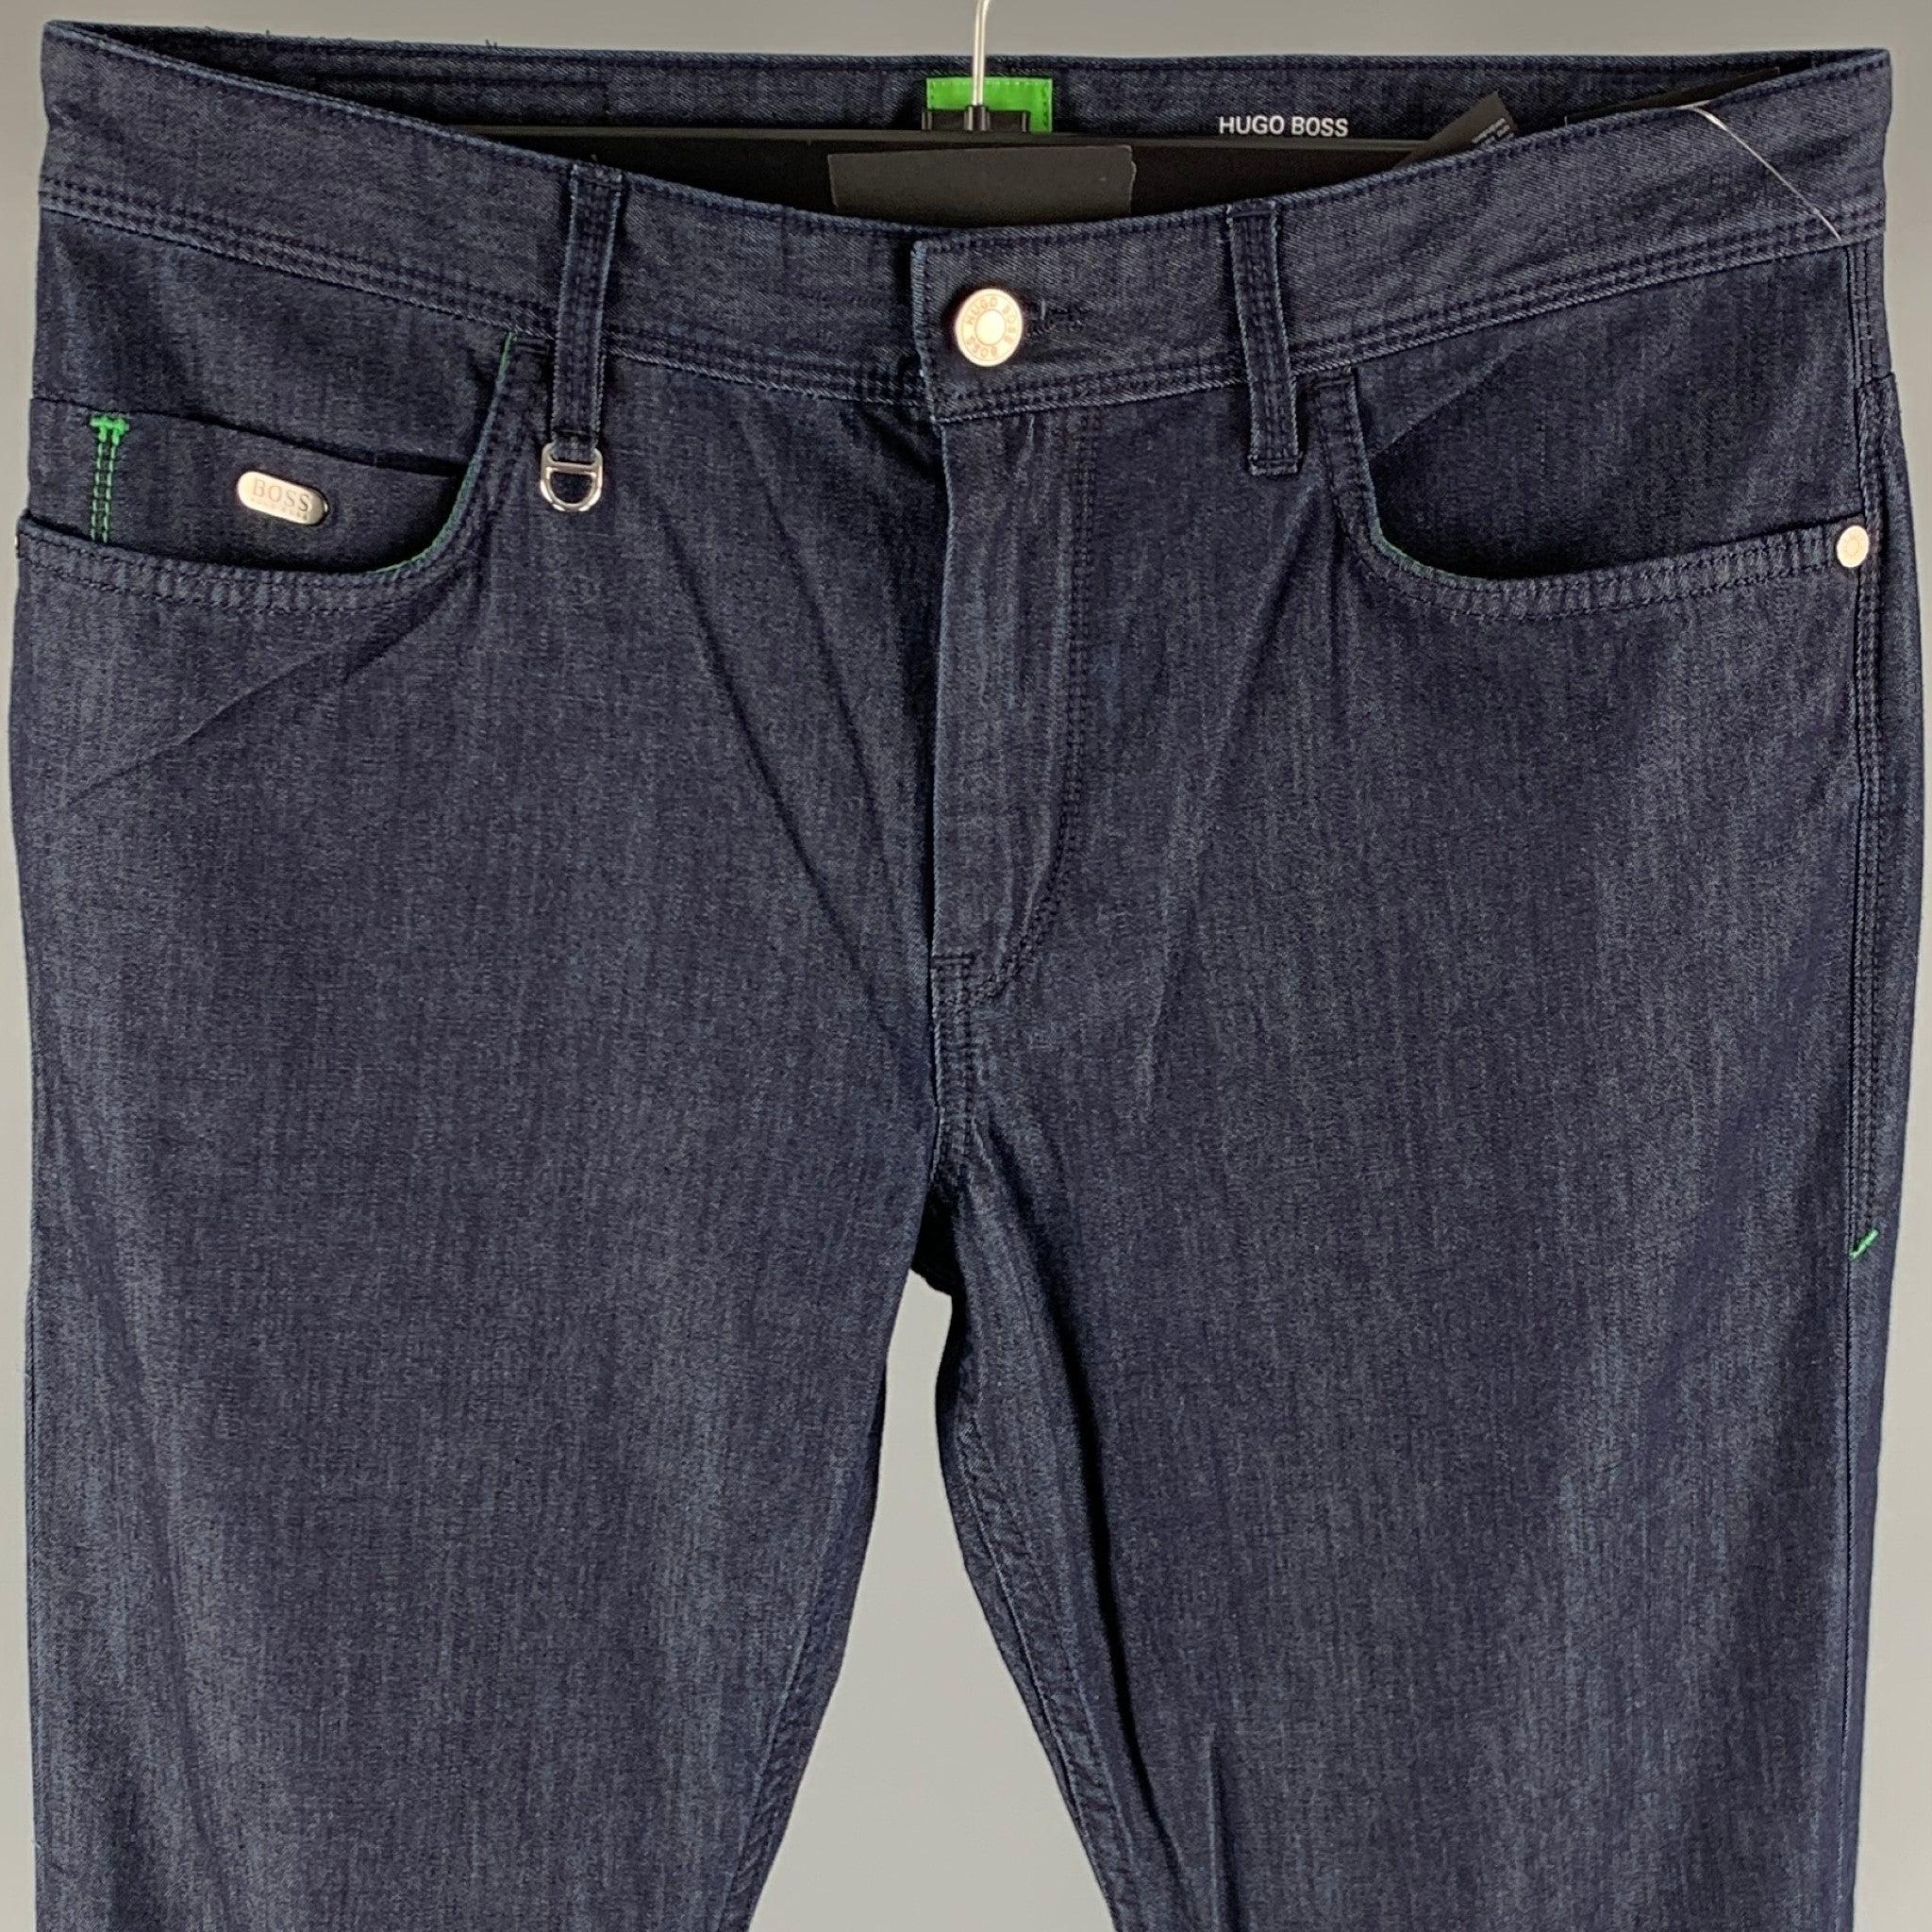 HUGO BOSS Size 33 Blue Cotton Blend Jeans In Excellent Condition For Sale In San Francisco, CA